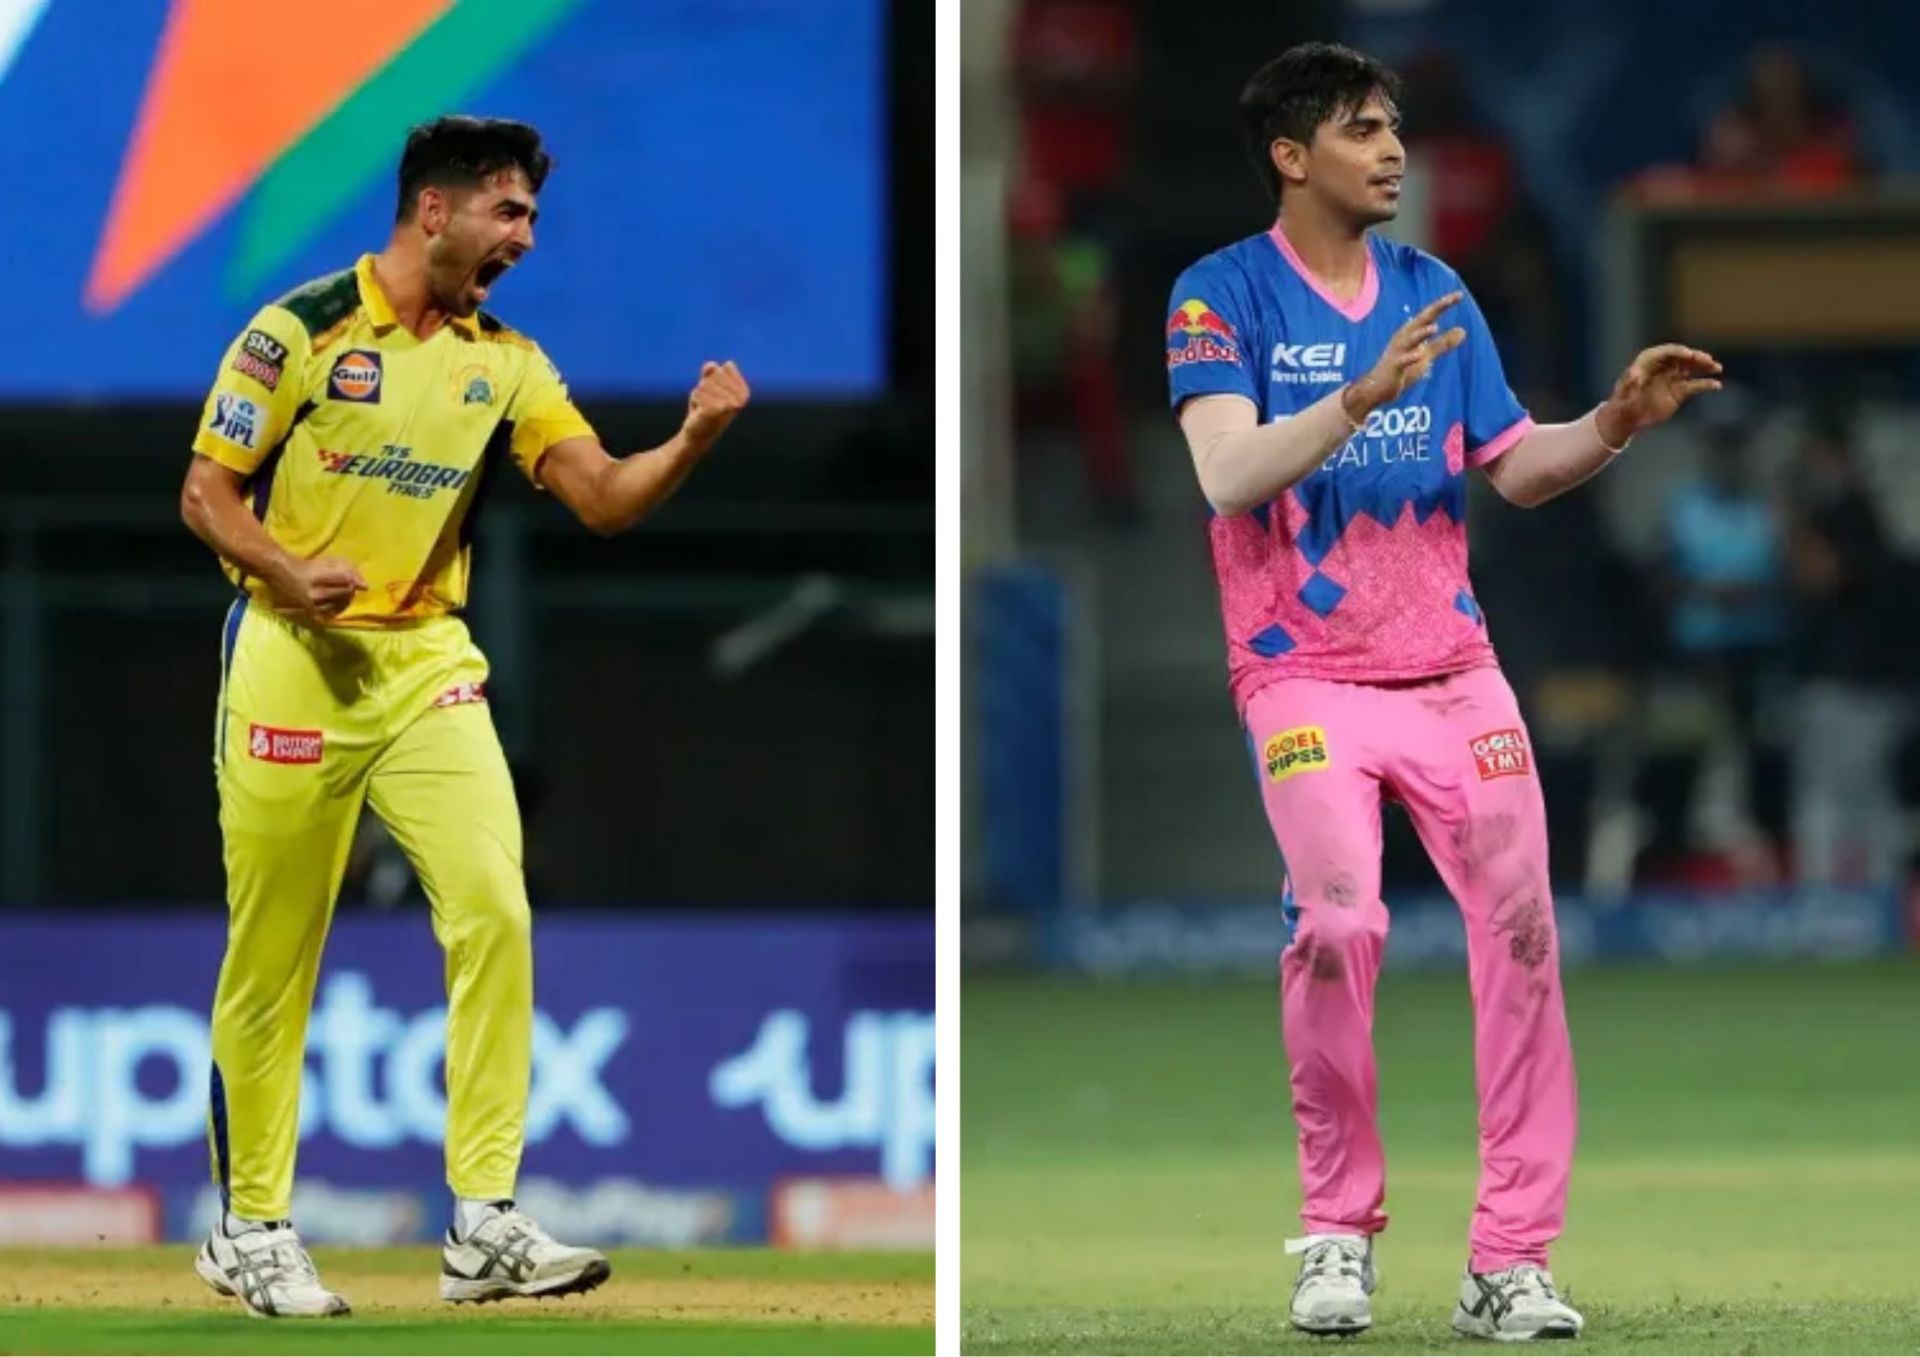 Mukesh Choudhary and Kartik Tyagi are among the highly-talented young fast-bowlers in India at present (Picture Credits: IPL).